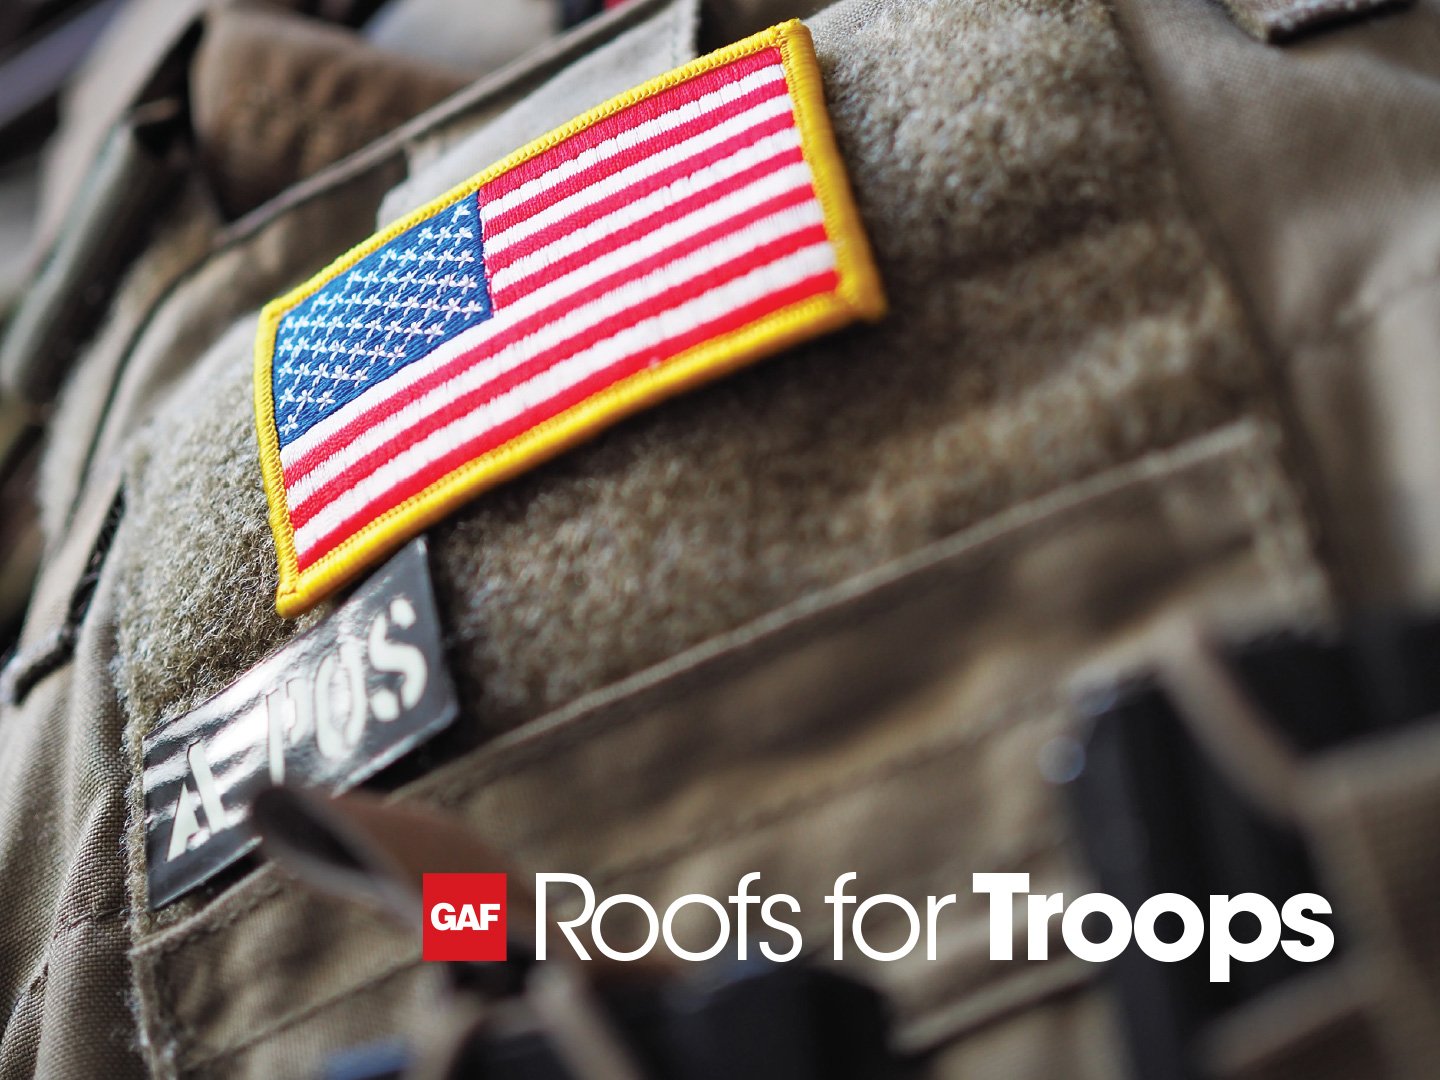 roofs-for-troops-rebate-on-gaf-lifetime-roofing-systems